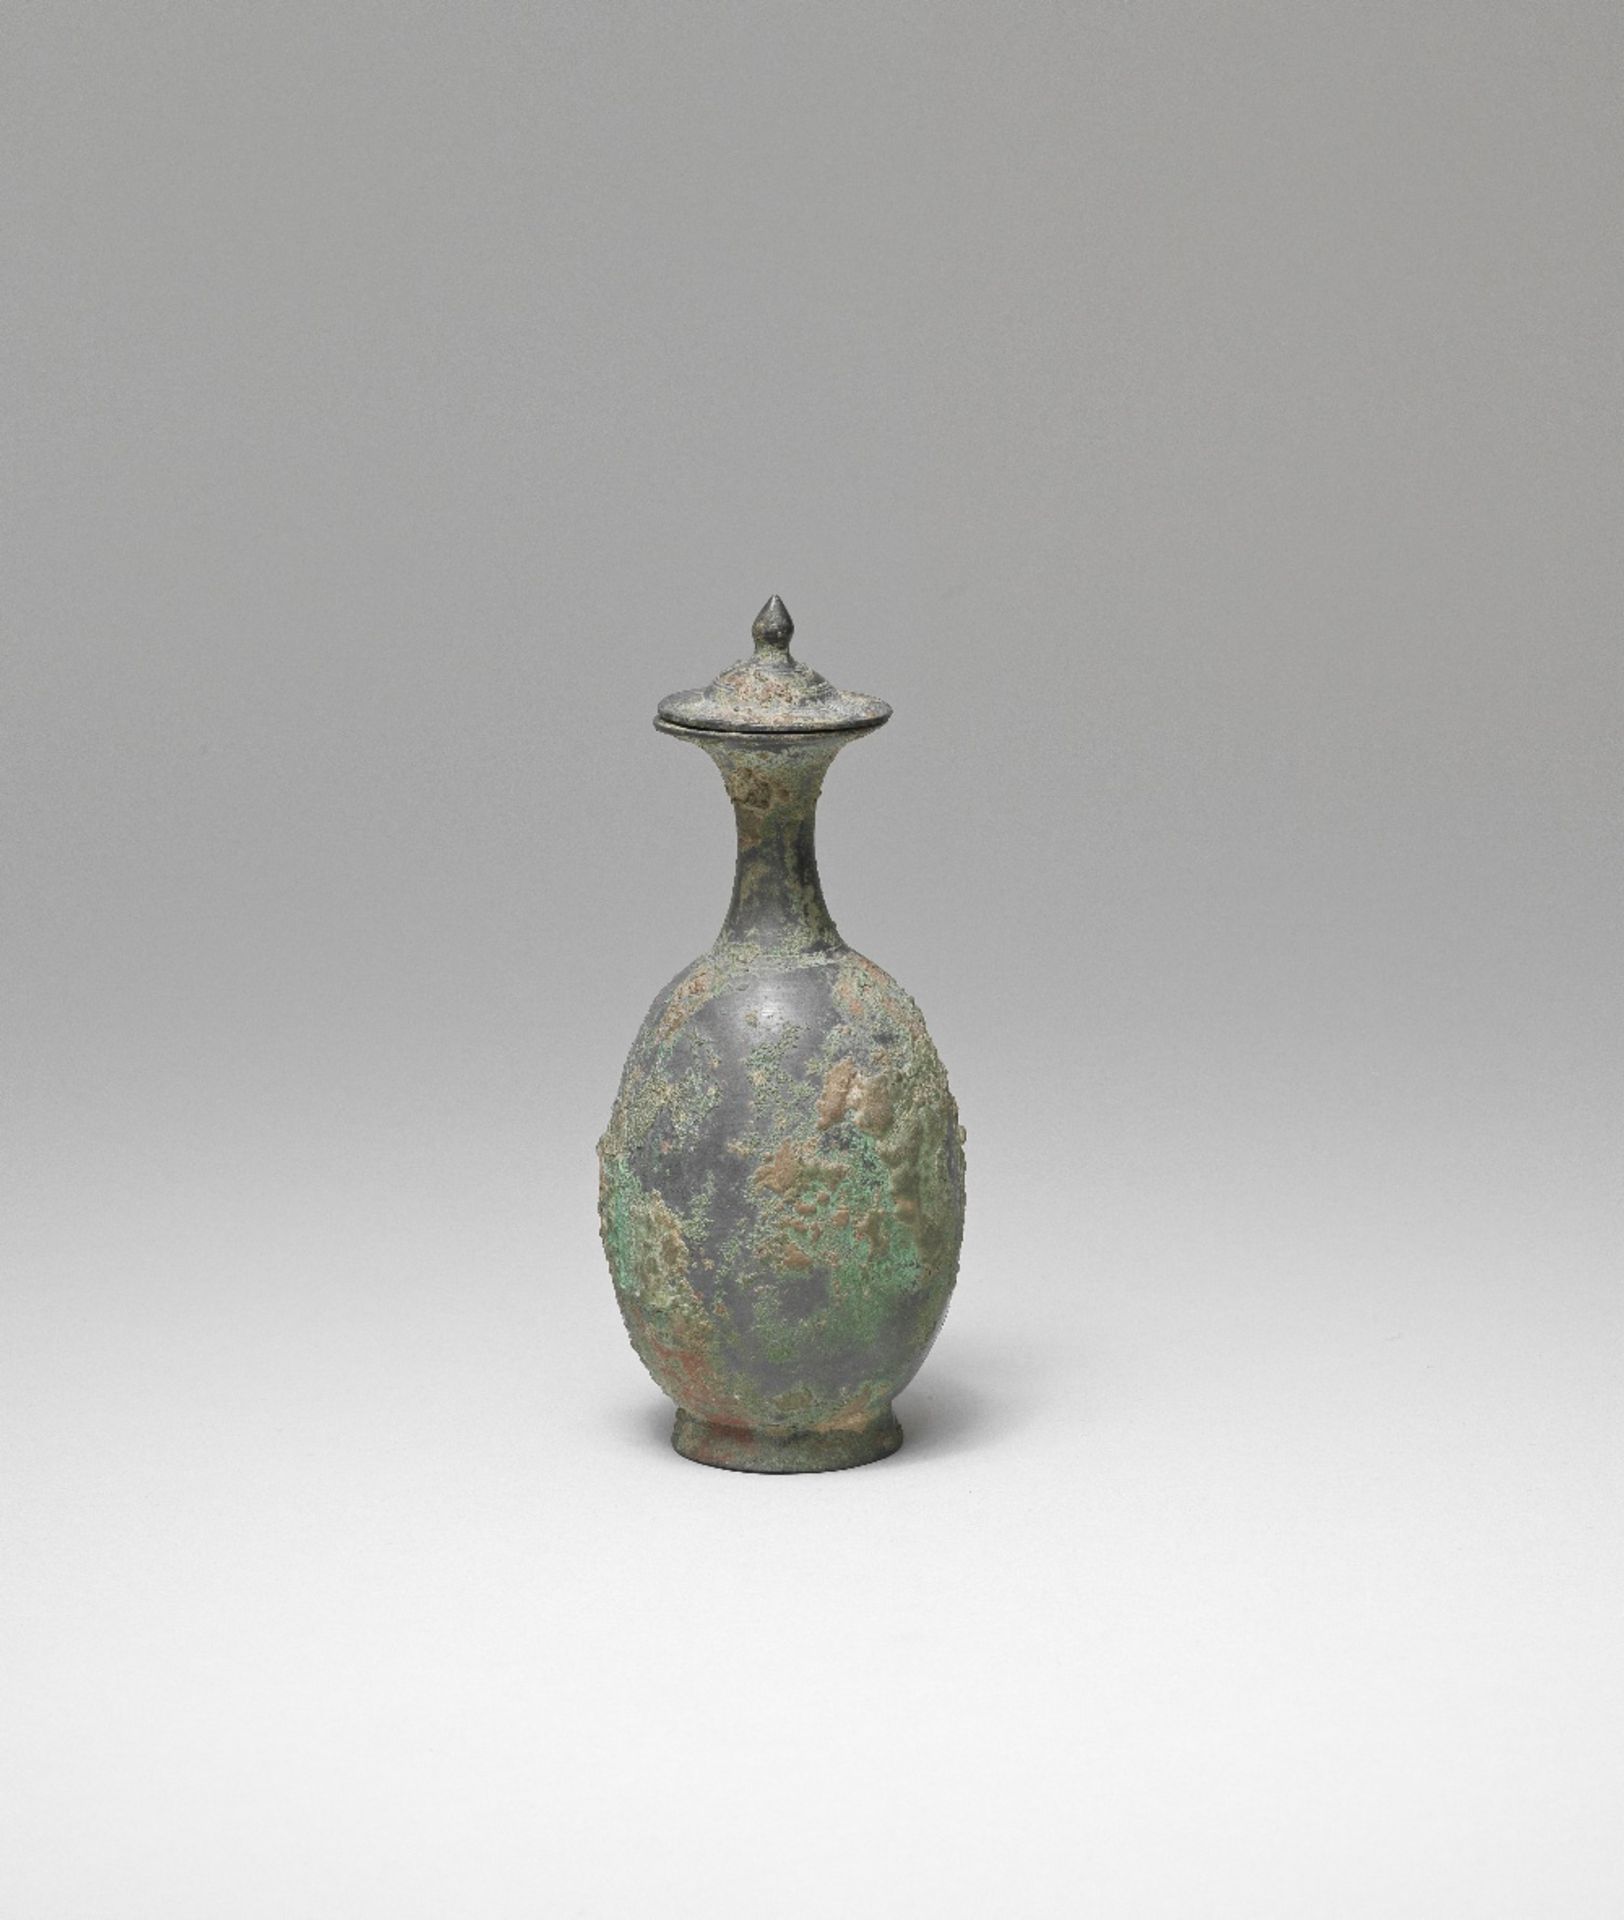 A RARE BRONZE PERFUME FLASK AND COVER Sui/Tang Dynasty (2)